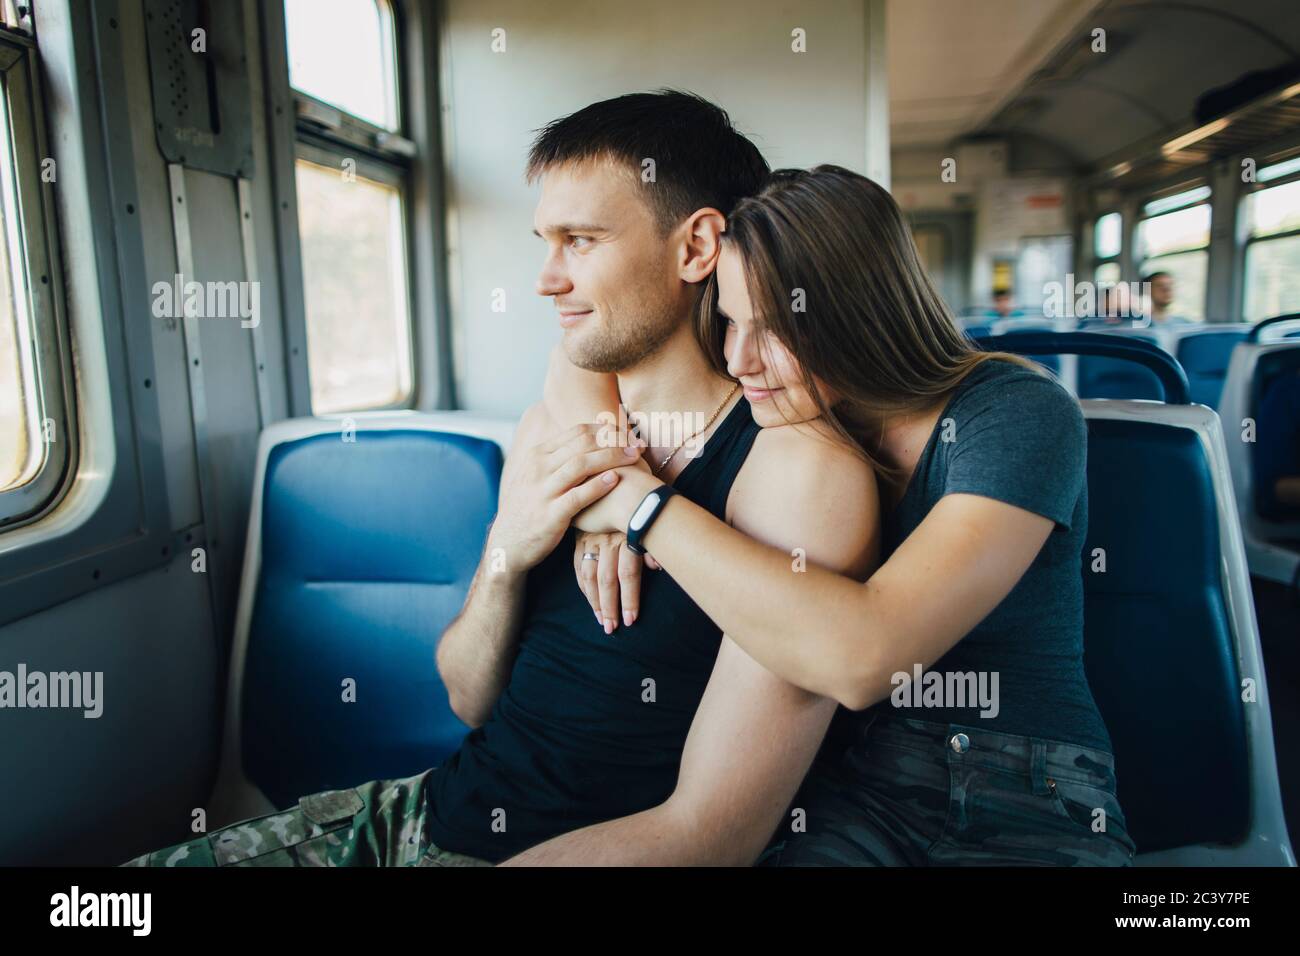 Young couple embracing in train Stock Photo